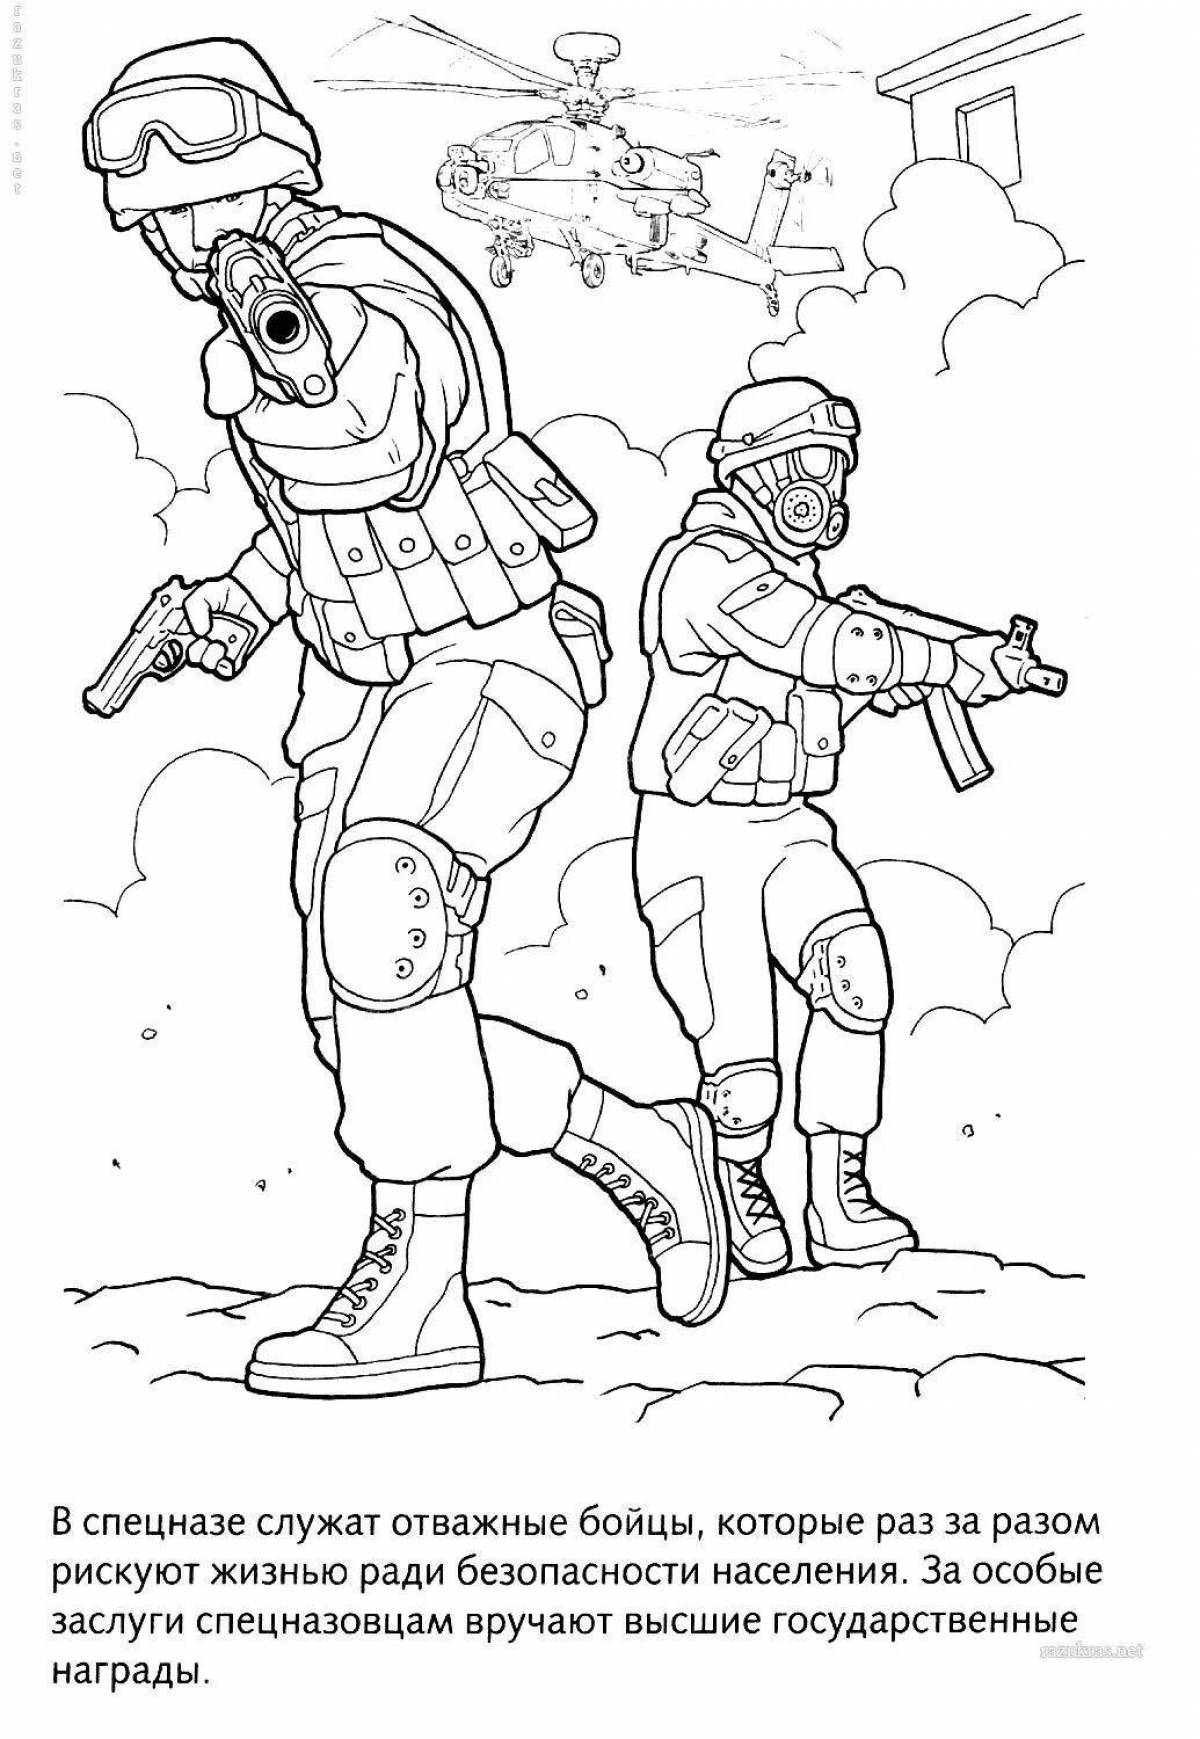 Great russian soldier coloring page